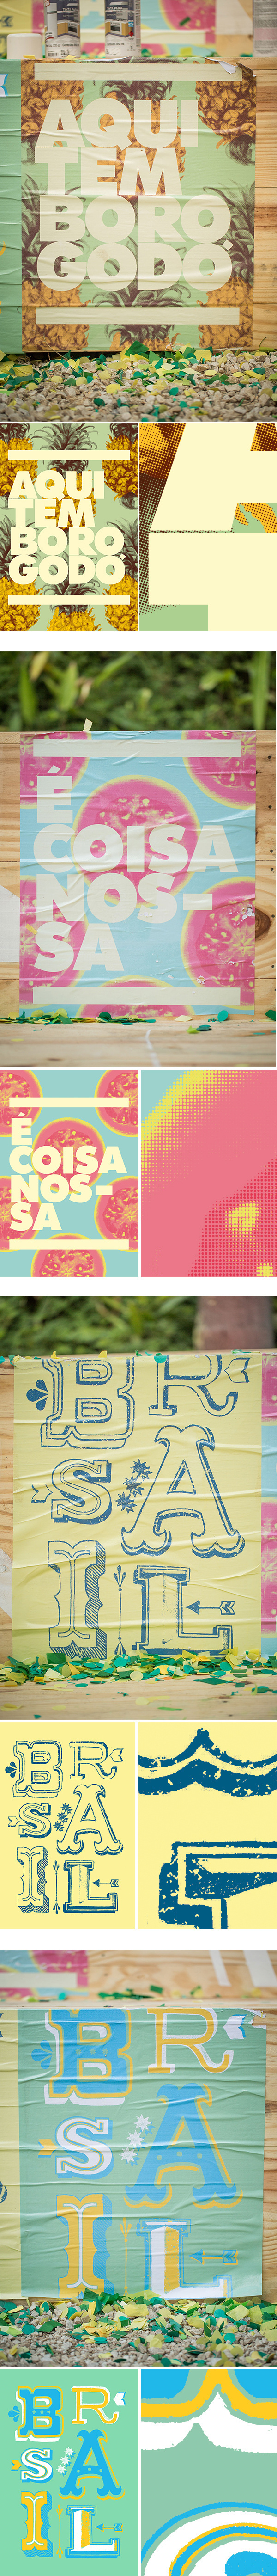 CWorld cup idea #86: Fifa World Cup 2014 on Behance #typography #poster #lettering #fruit #world cup #brazil